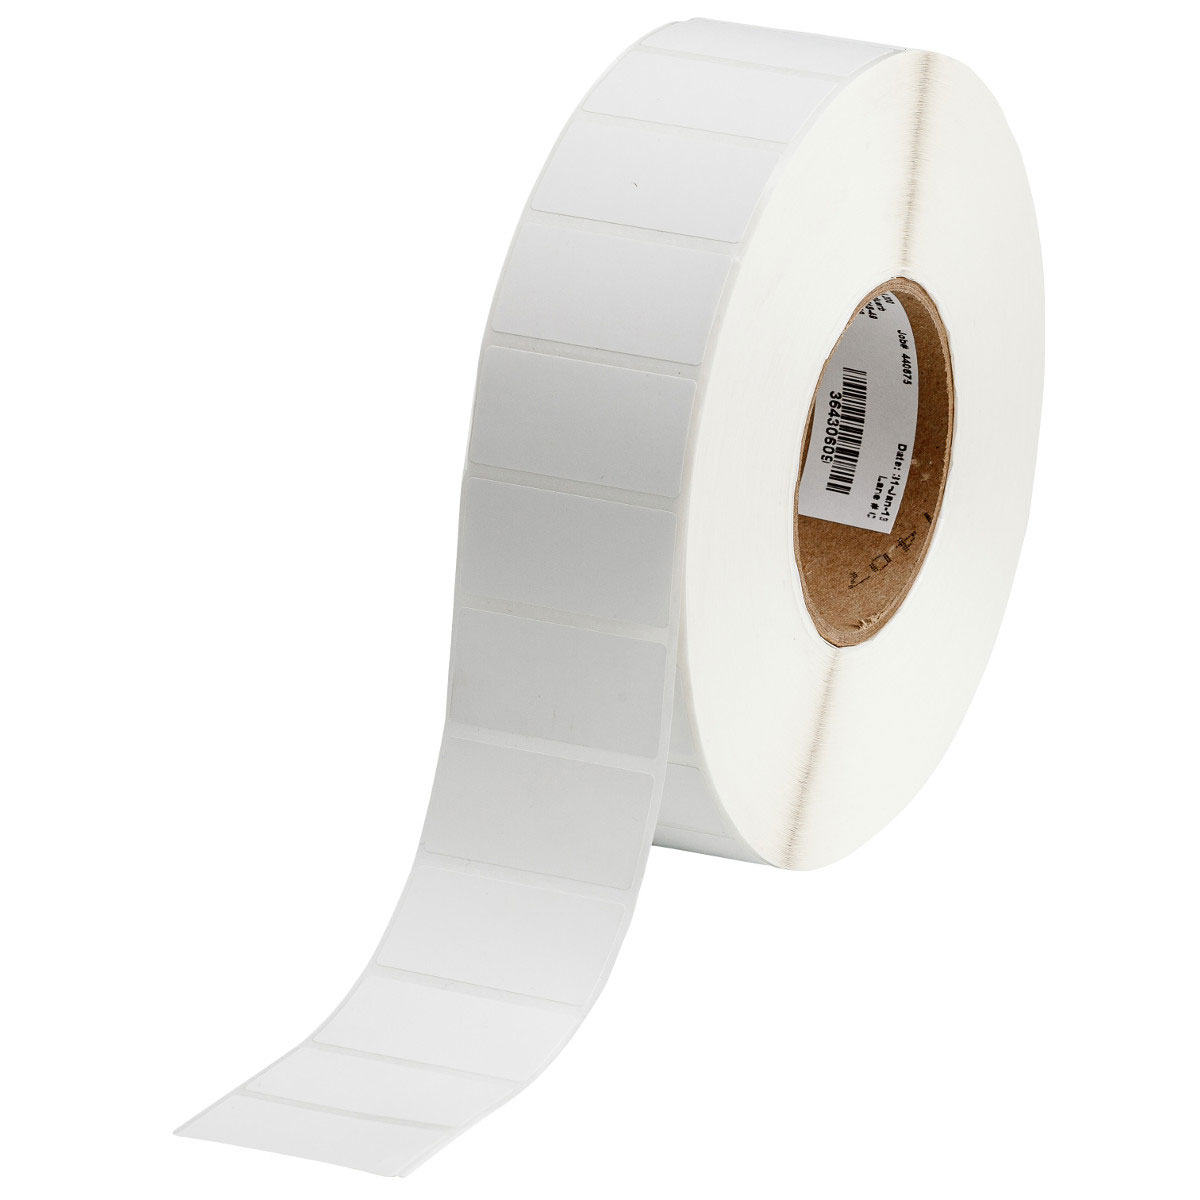 3 Core Series Thermal Transfer Paper Label, White, B-424, 3 in x